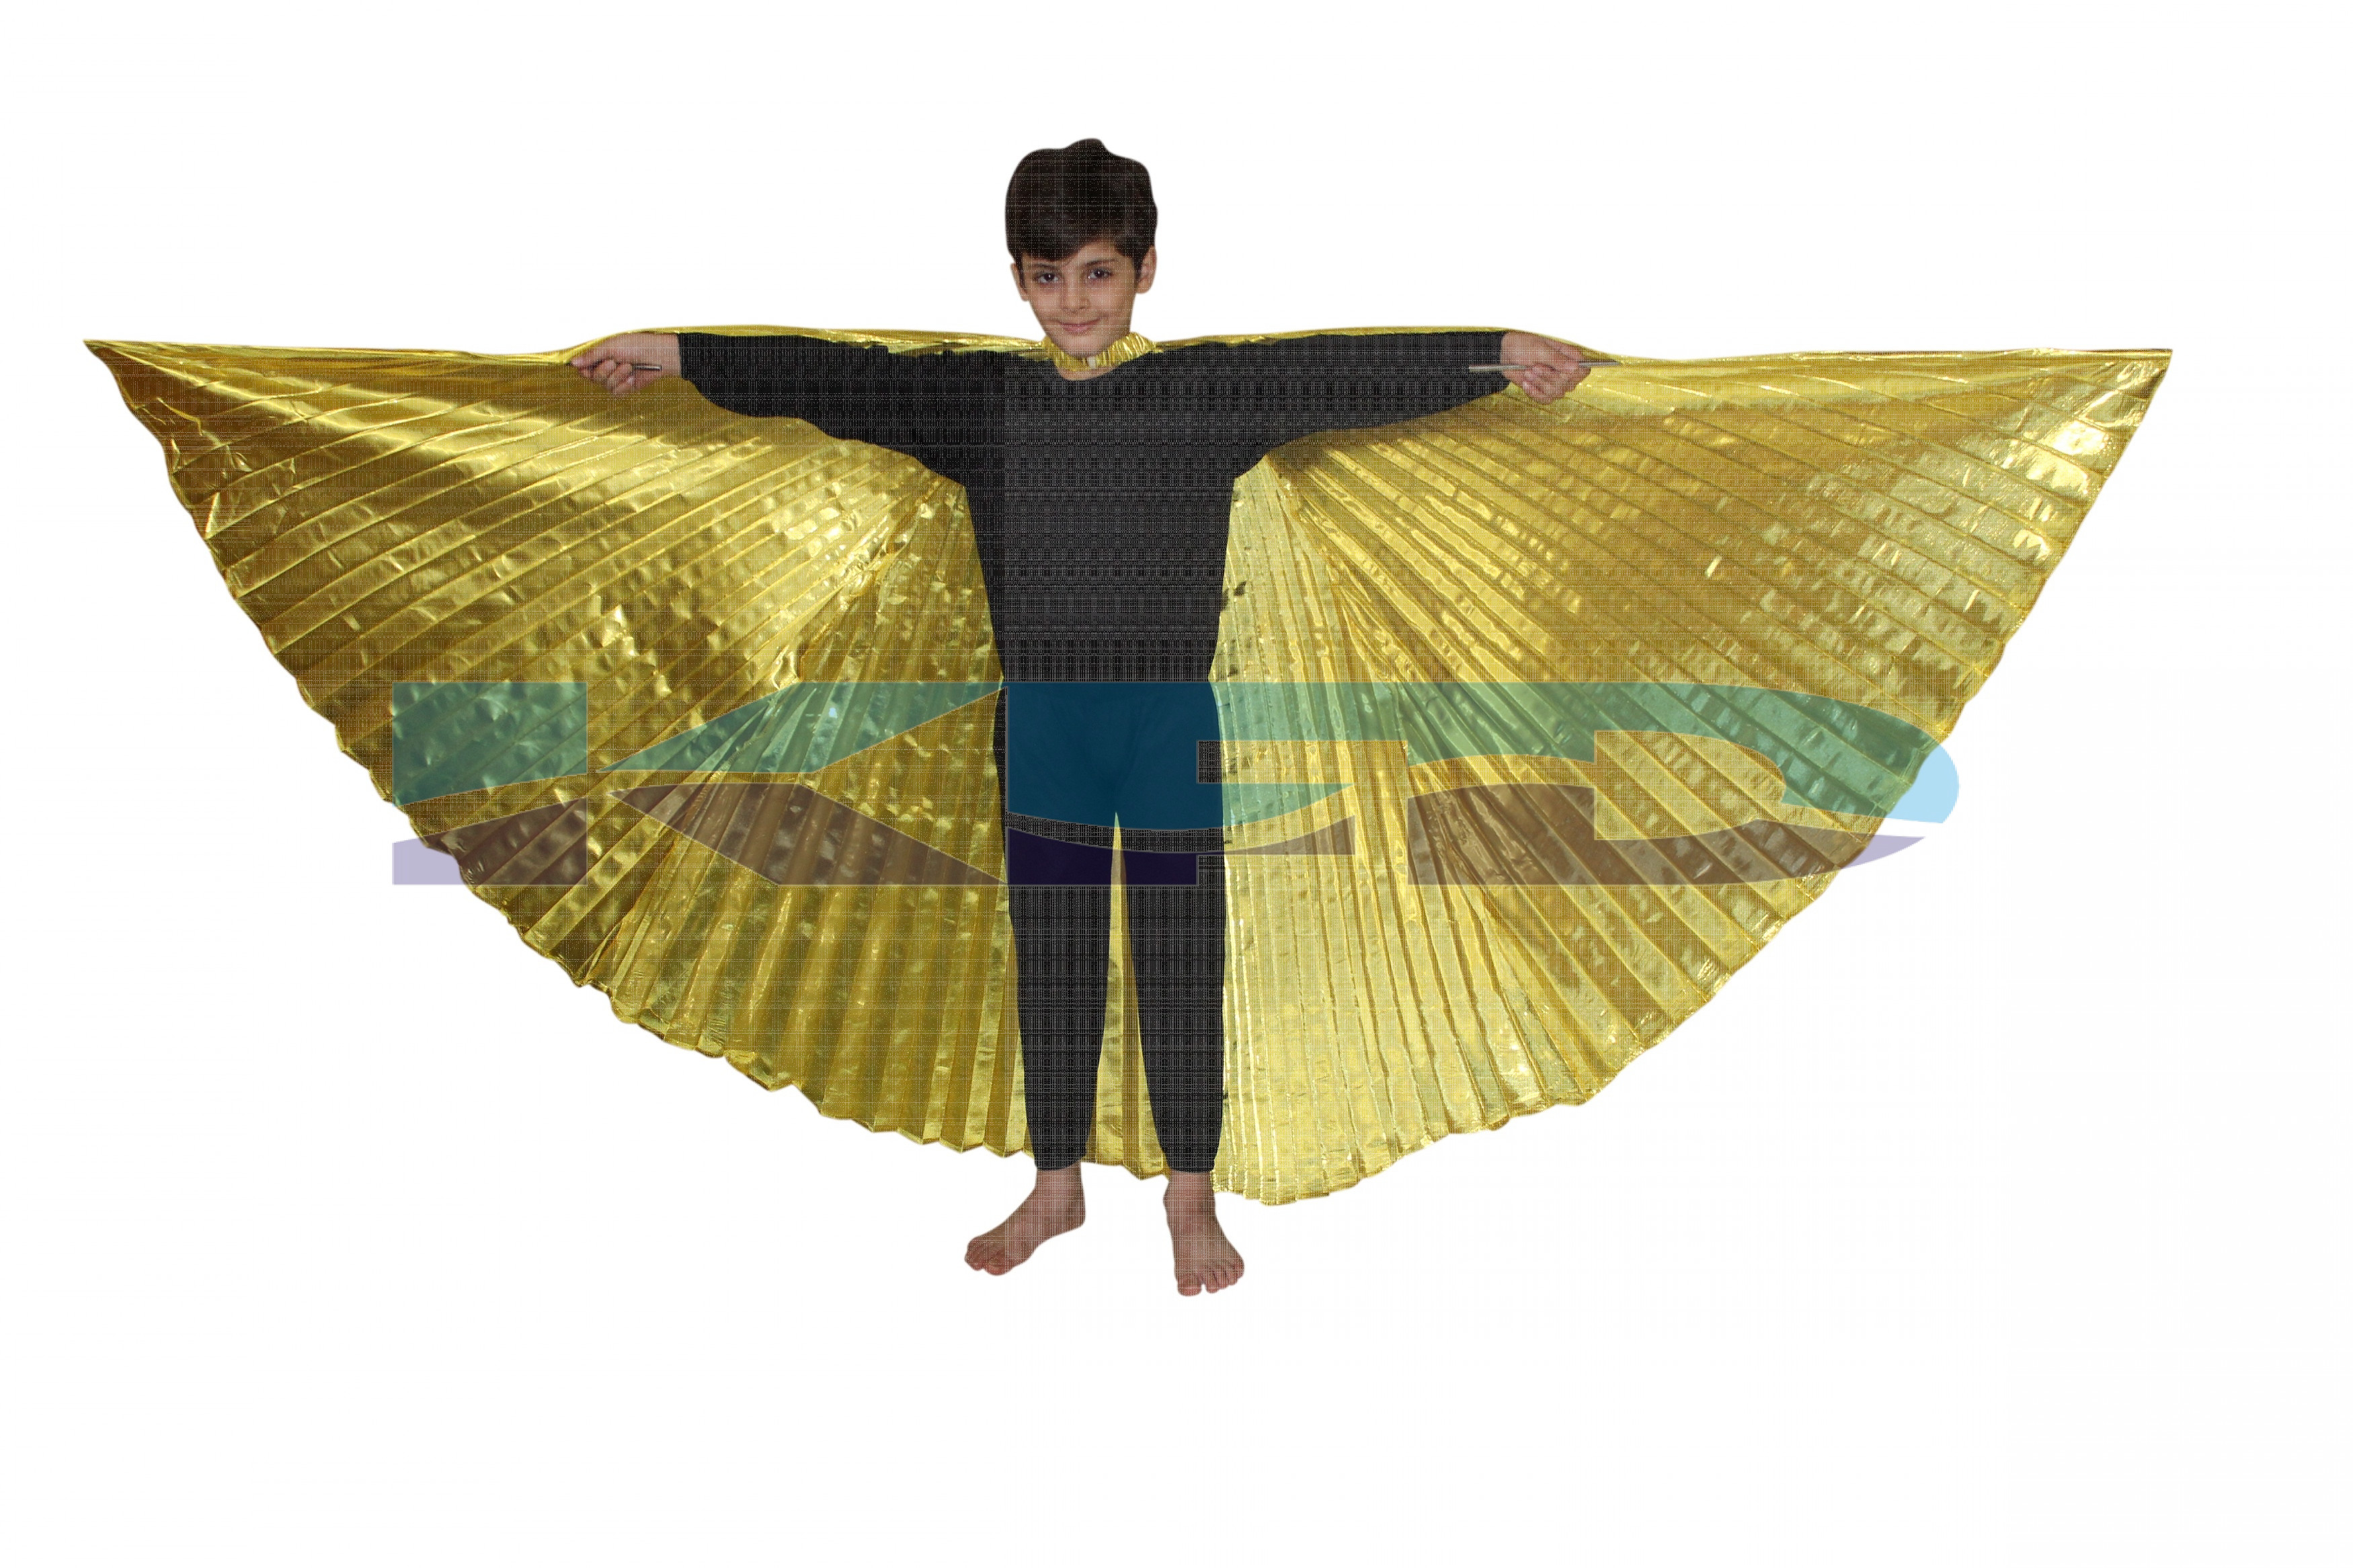 Belly Wings/Butterfly Wings/Cleopatra/Igypcian Dance Wings Full Size/CosPlay Costume For School Annual function/Theme Party/Competition/Stage Shows/Birthday Party Dress